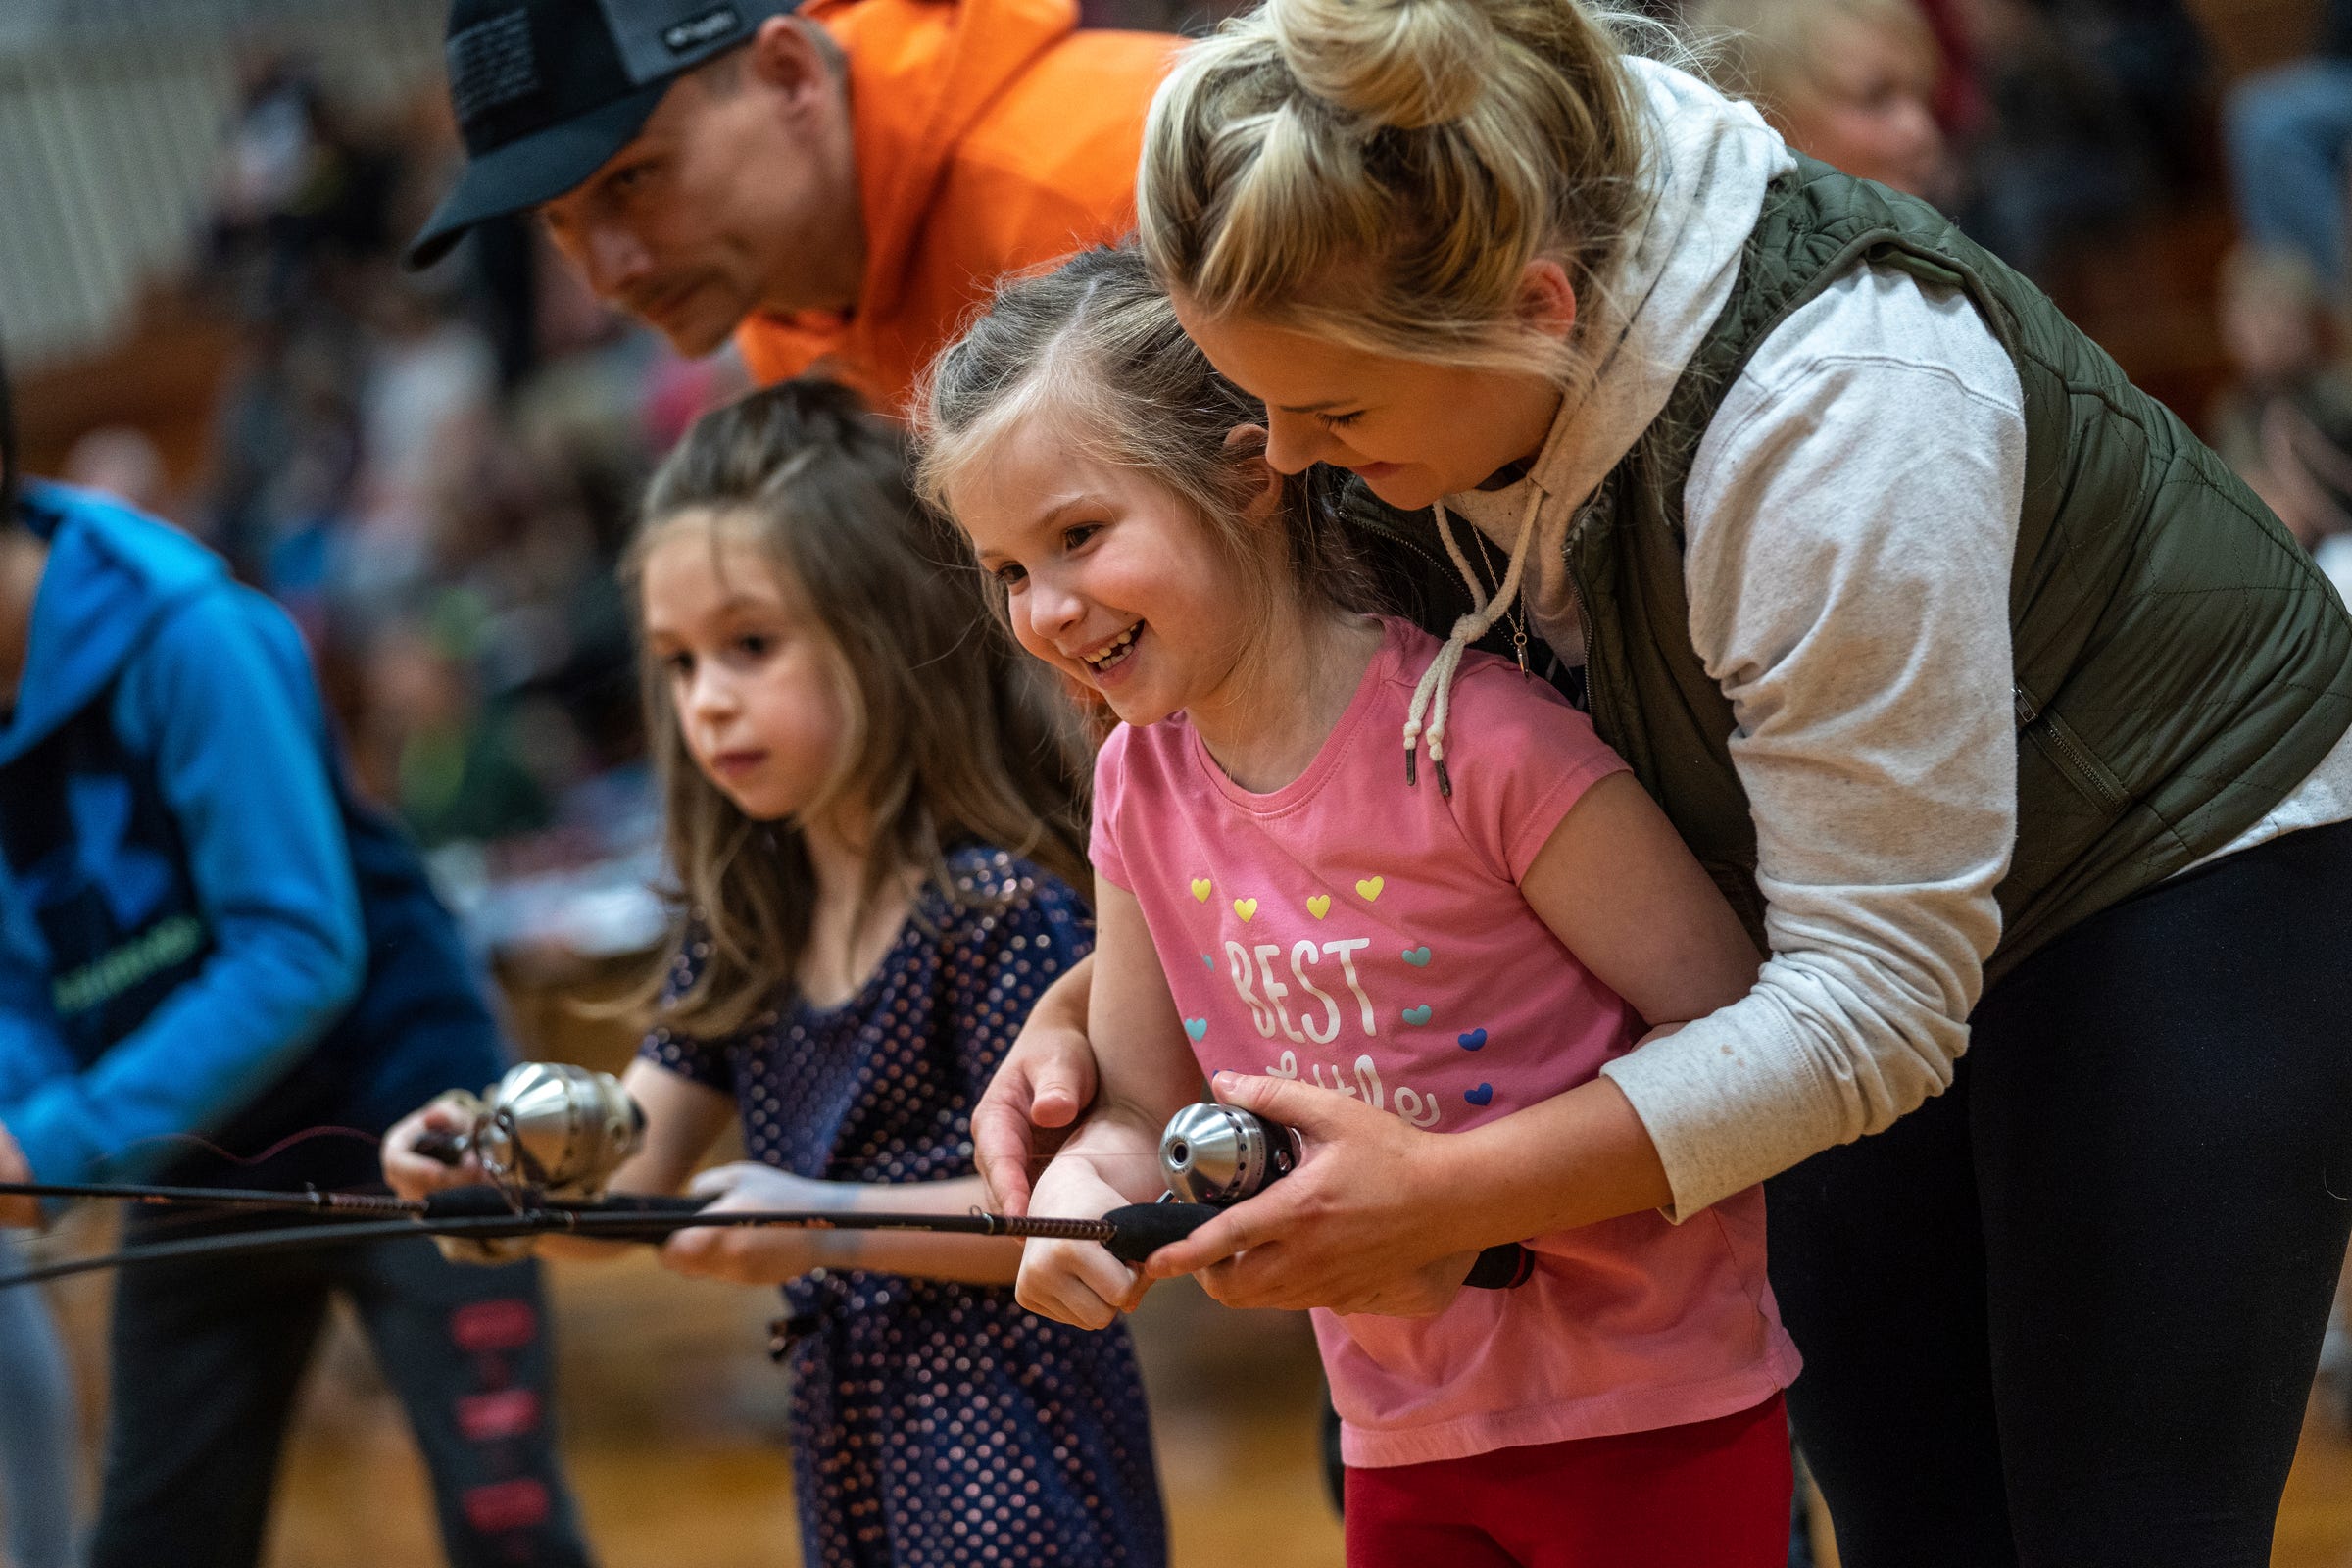 Emily Schummer, right, of Newberry helps her stepdaughter Avery Schultz cast a line while playing a magnetic fishing game inside the gym at Newberry High School during the 65th annual Kids Tackle Party held by the Tahquamenon Sportsmen's Club in Newberry on Saturday, April 22, 2023, in Michigan's Upper Peninsula.